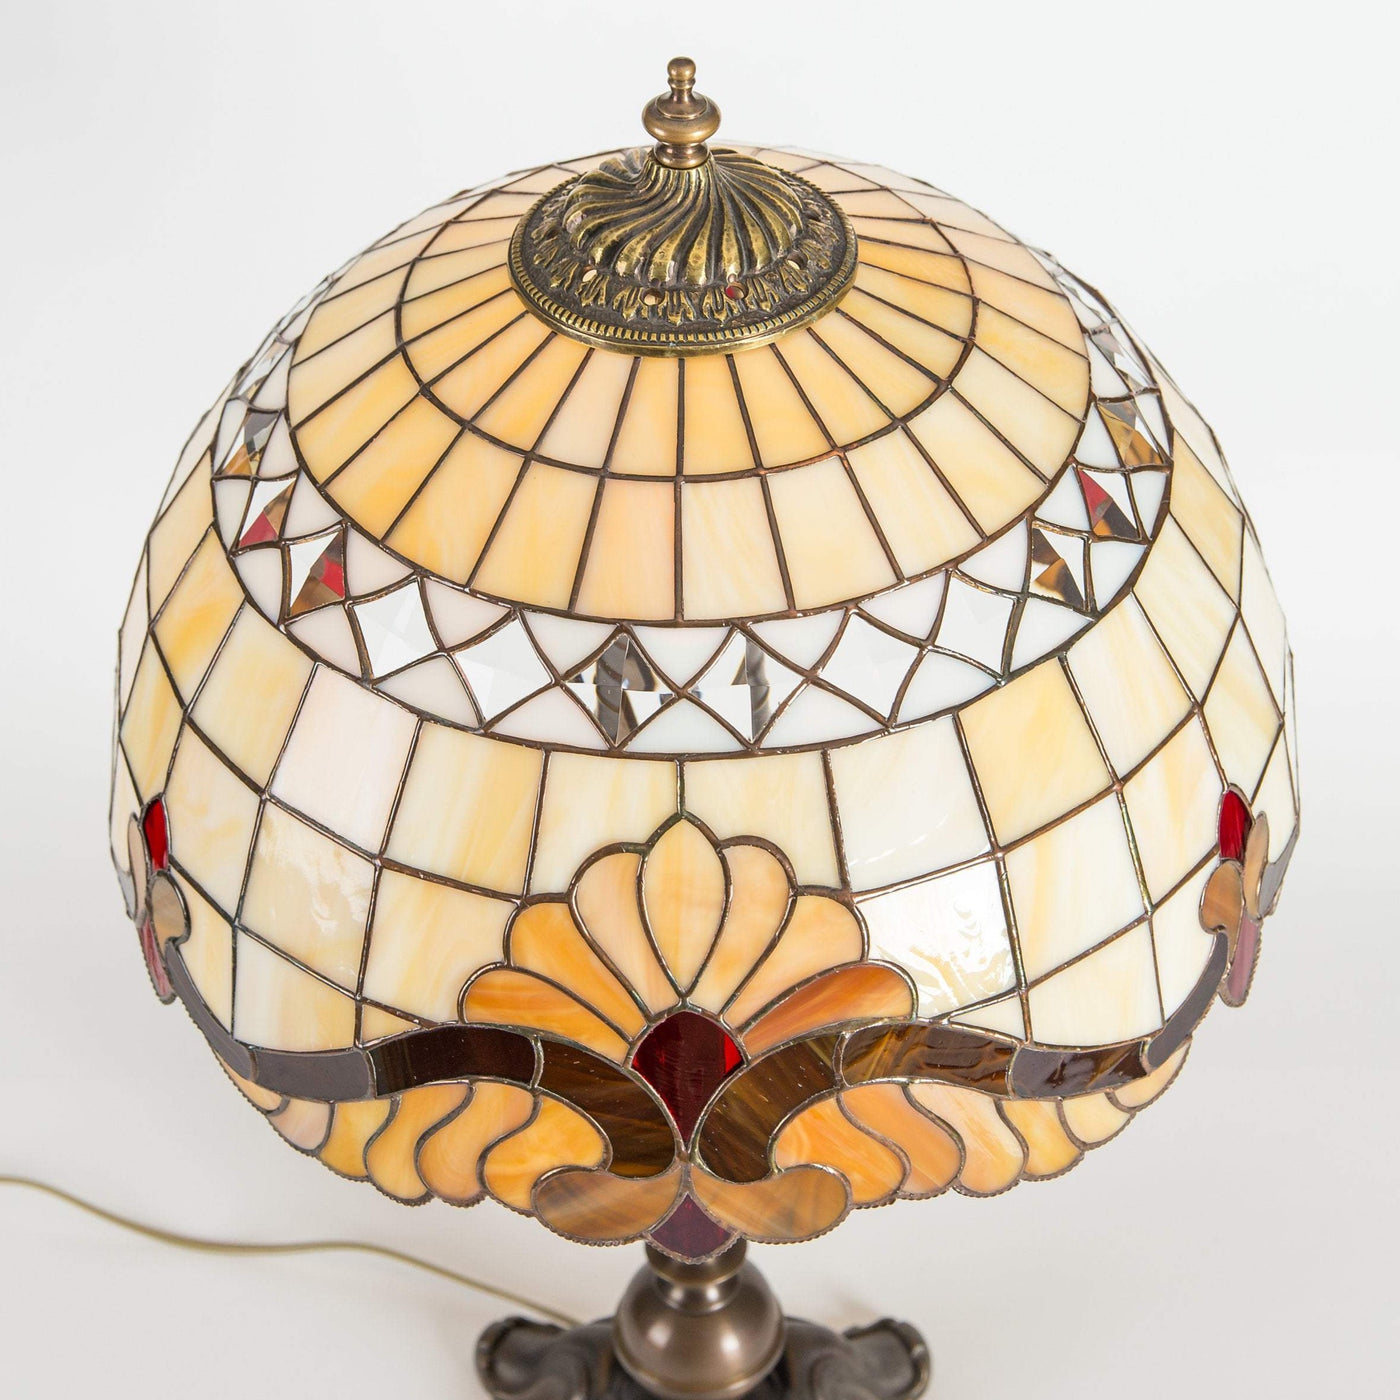 Top view of stained glass beige Tiffany lampshade with red inserted markings